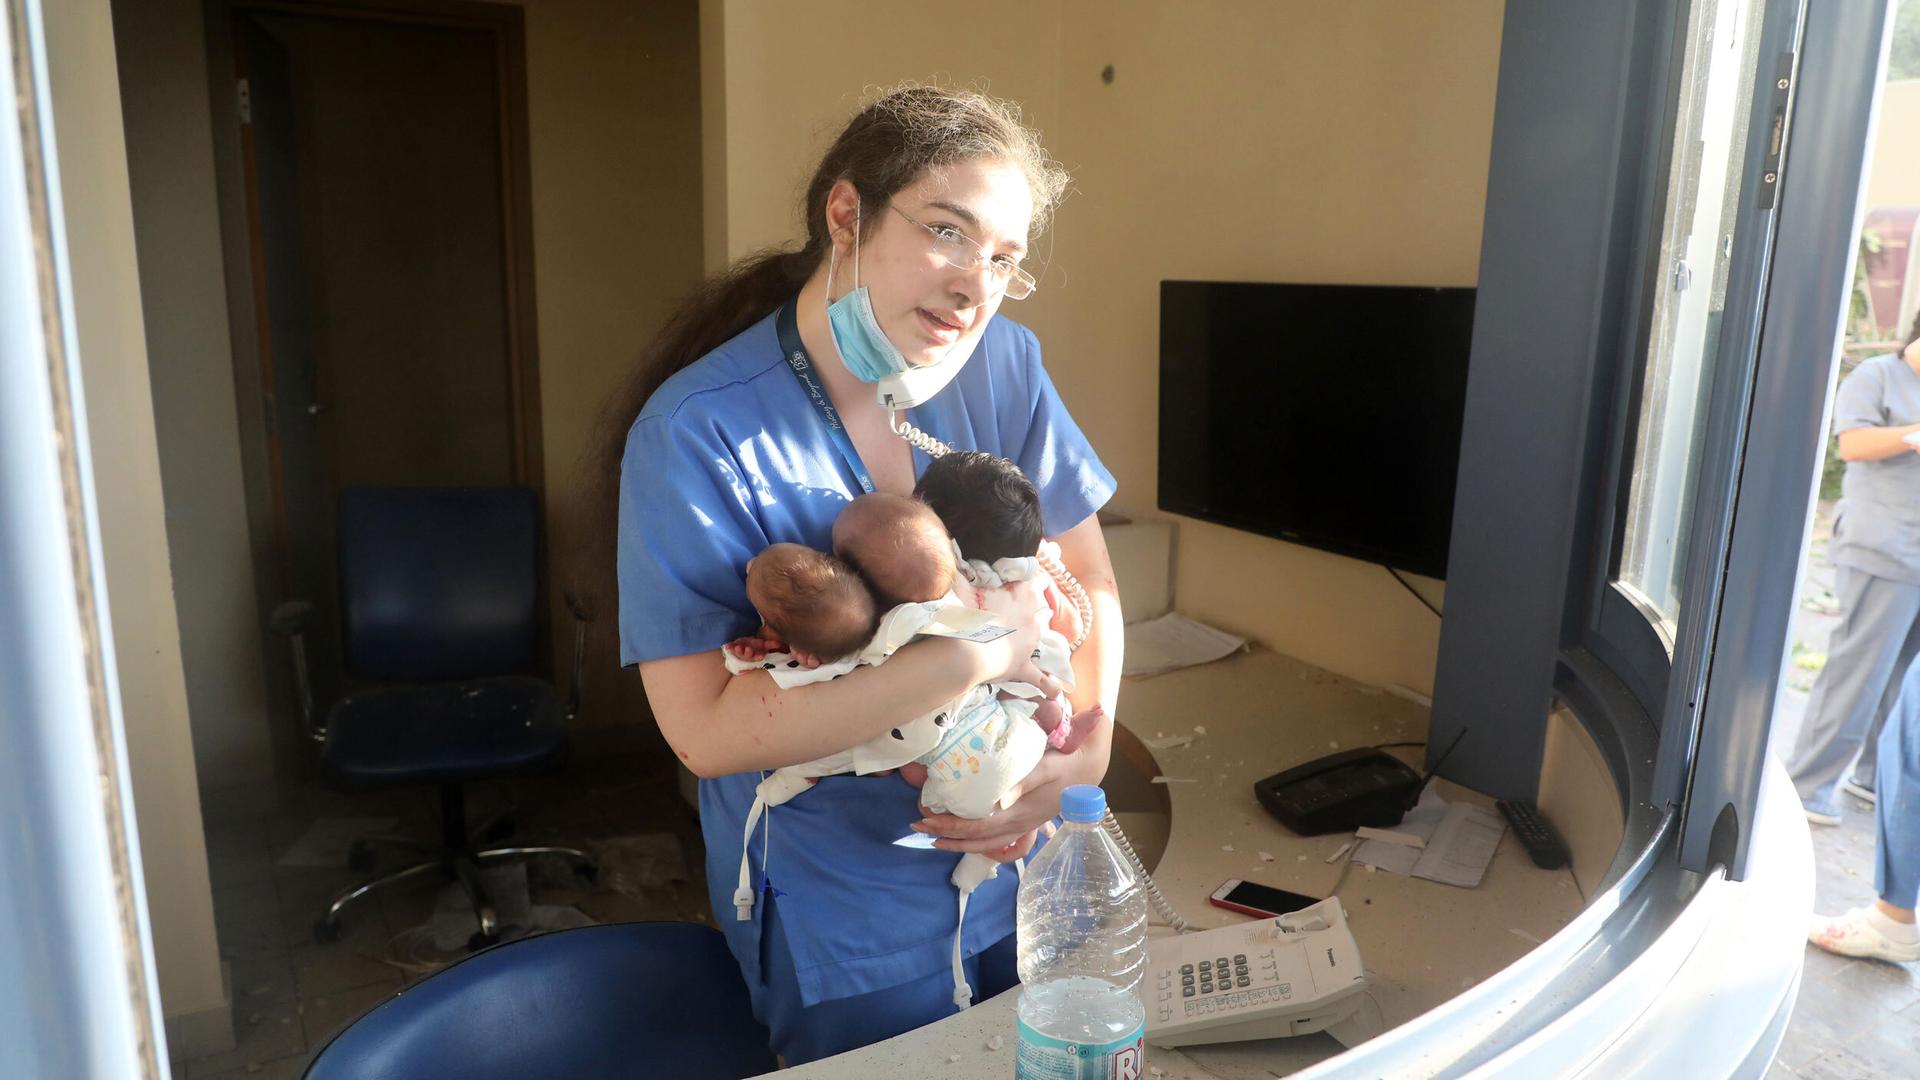 A woman with long hair and glasses wears blue scrubs holding three infants in her arms while talking on a phone in a damaged hospital 